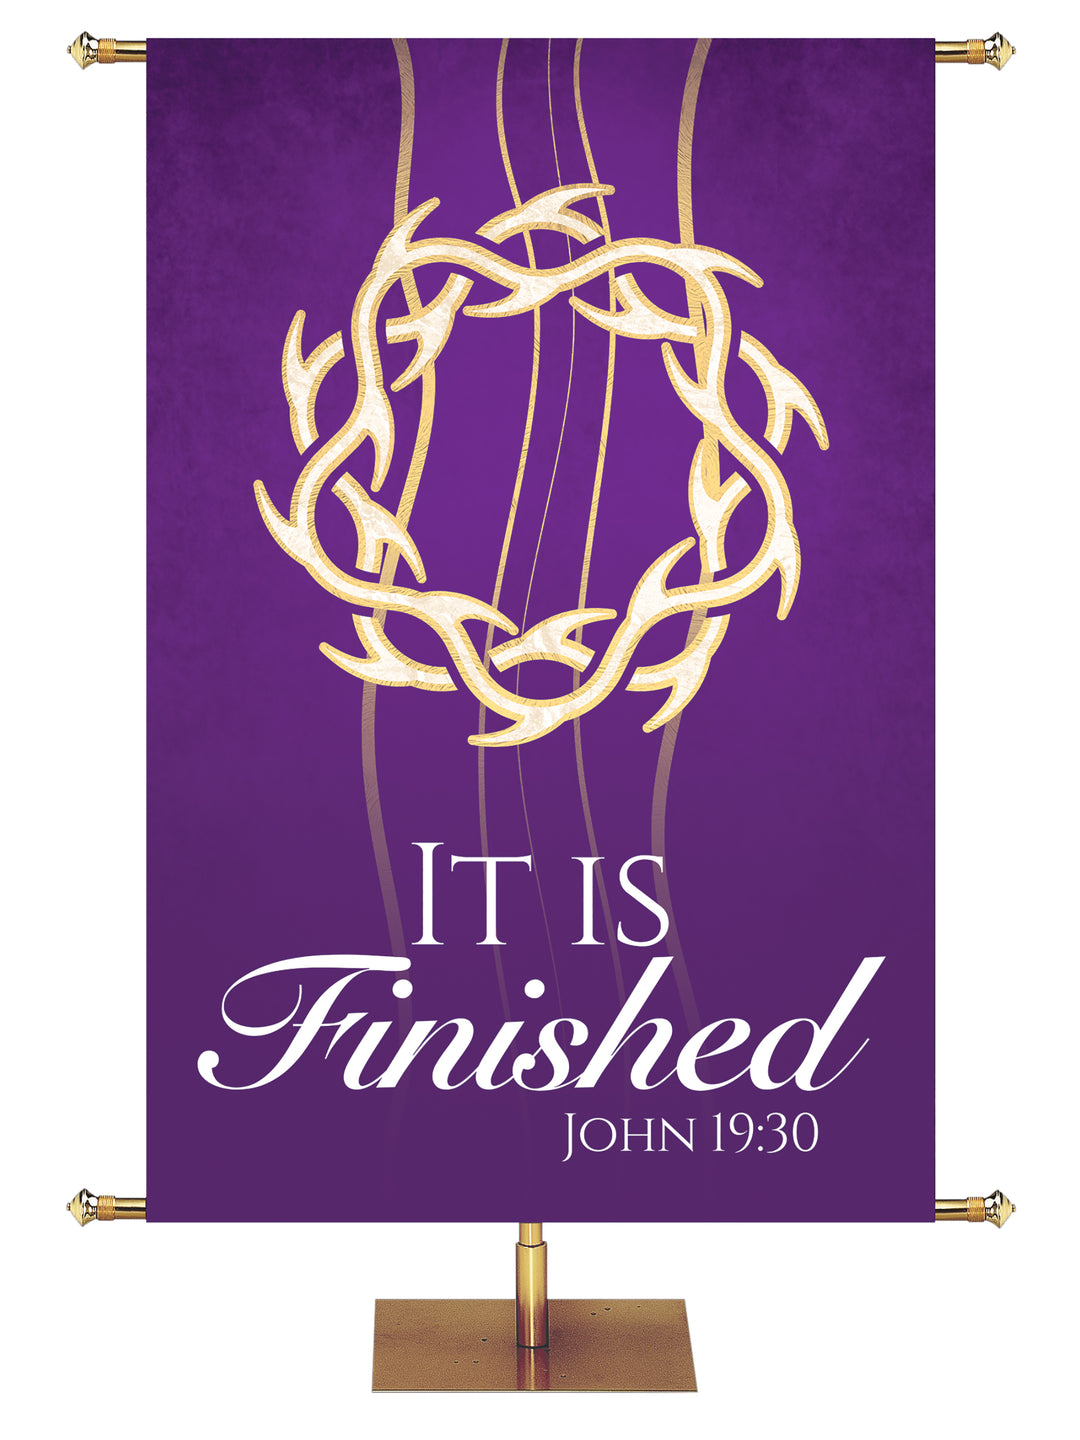 Experiencing God Symbols and Phrases Crown of Thorns, It Is Finished - Liturgical Banners - PraiseBanners